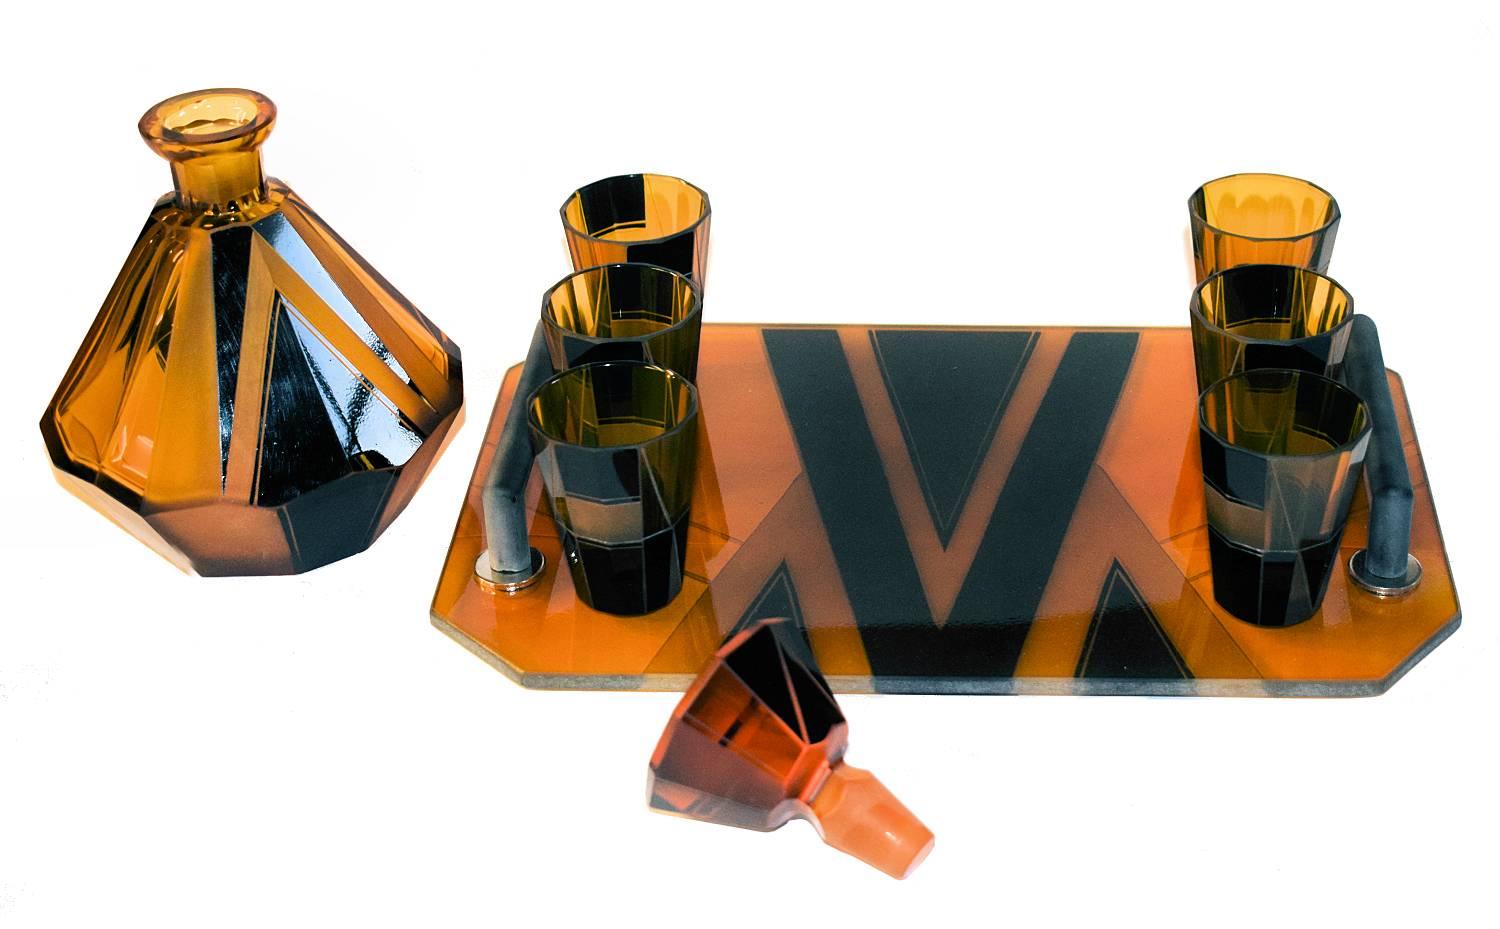 Wonderfully stylish 1930s Art Deco glass decanter set in a warm amber colour with black geometric enamel decoration. Originates from the Czech Republic. This wonderful set is deceptively heavy and shows signs of real quality. The whole set is in